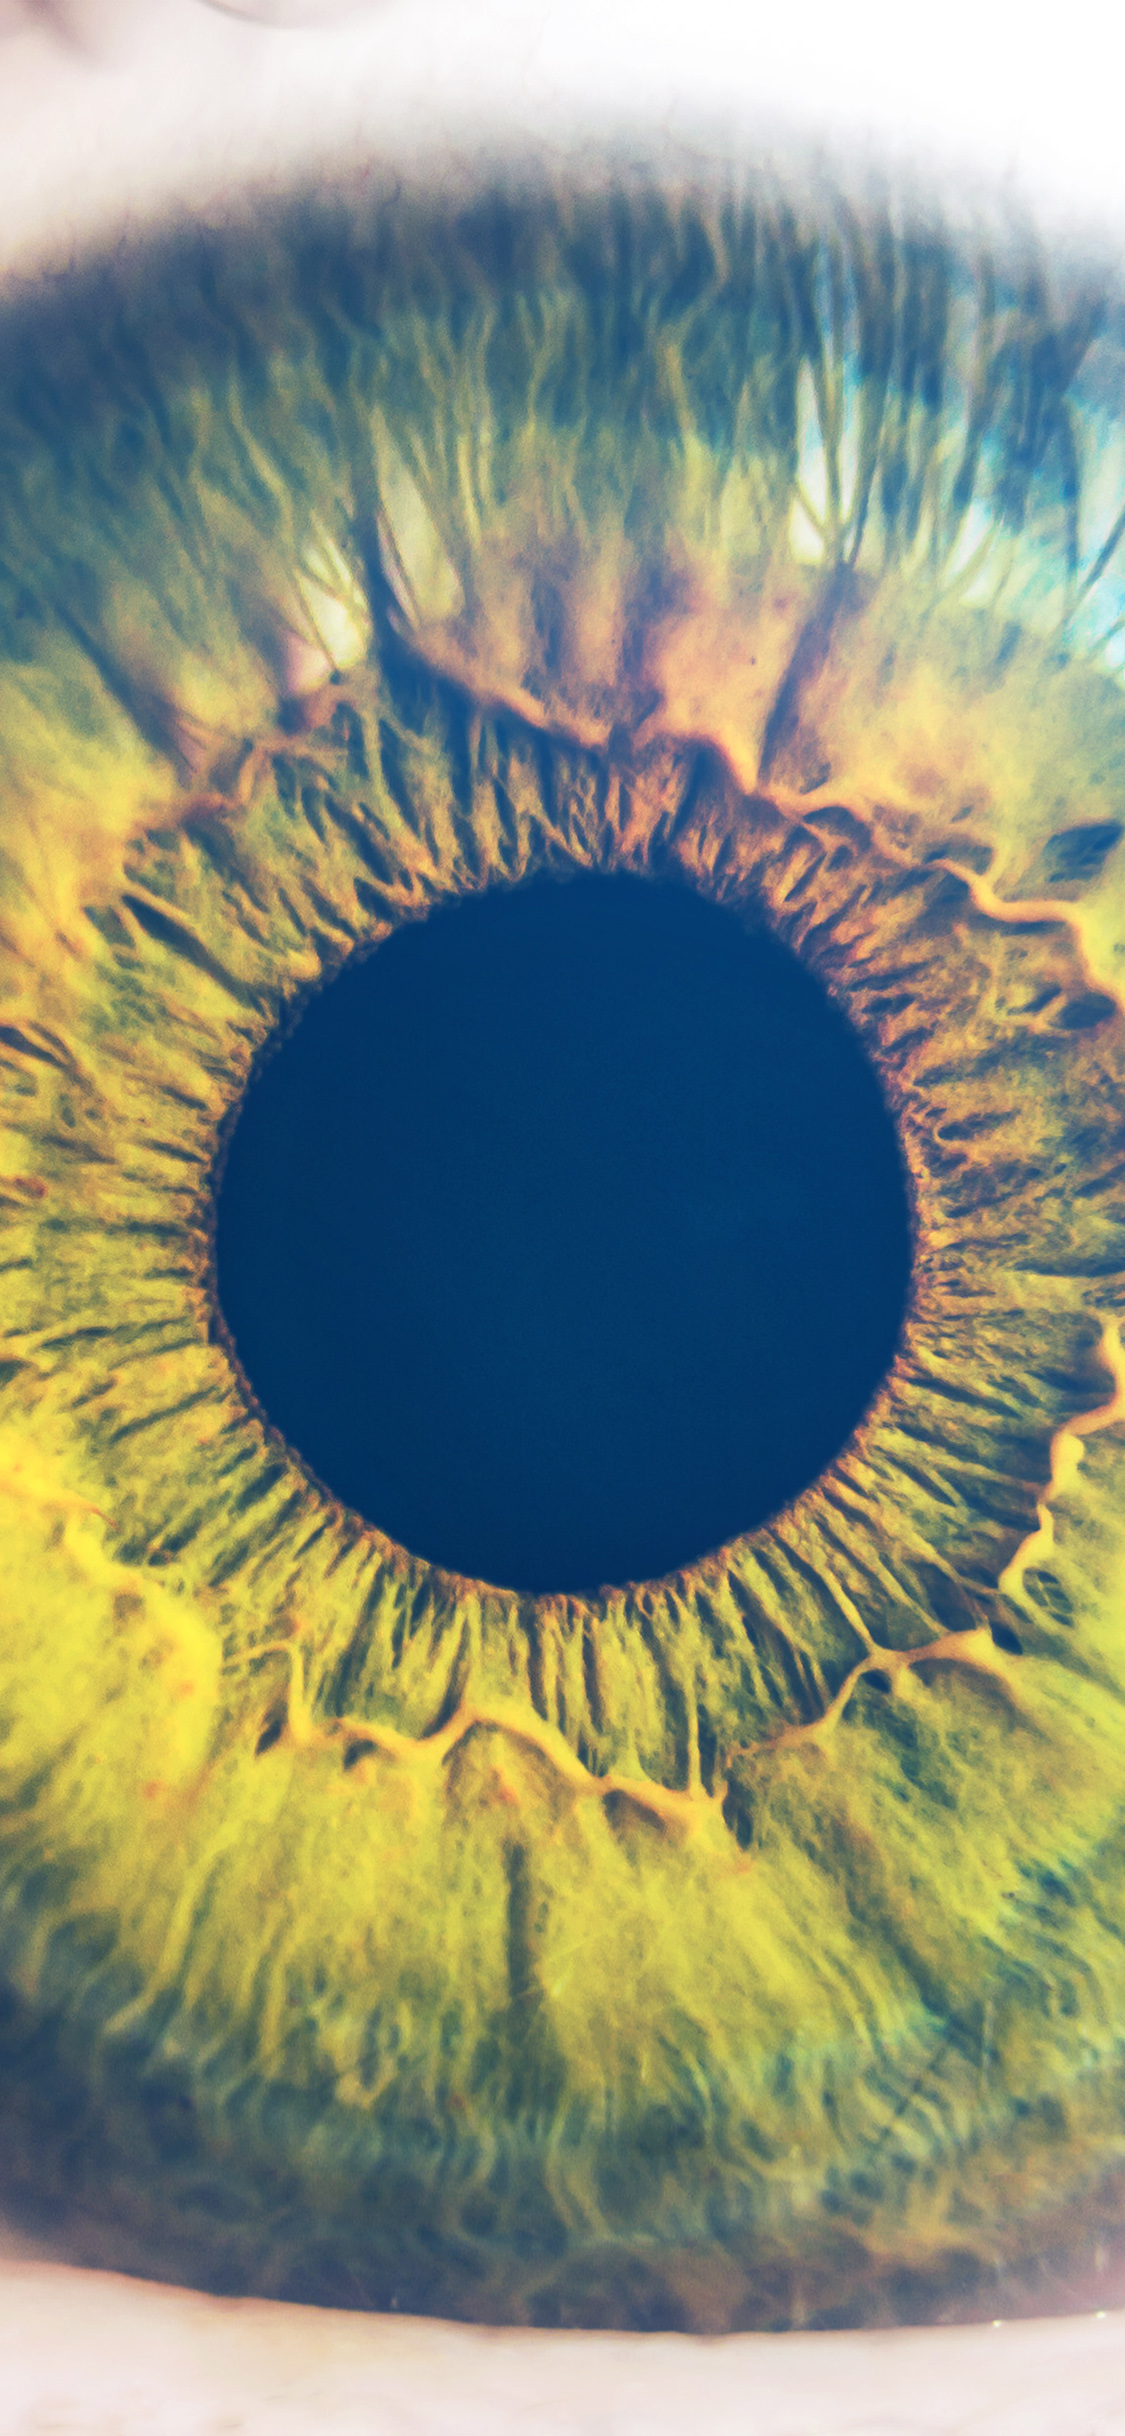 iPhone X wallpaper. eye human nature pupil body science flare blue